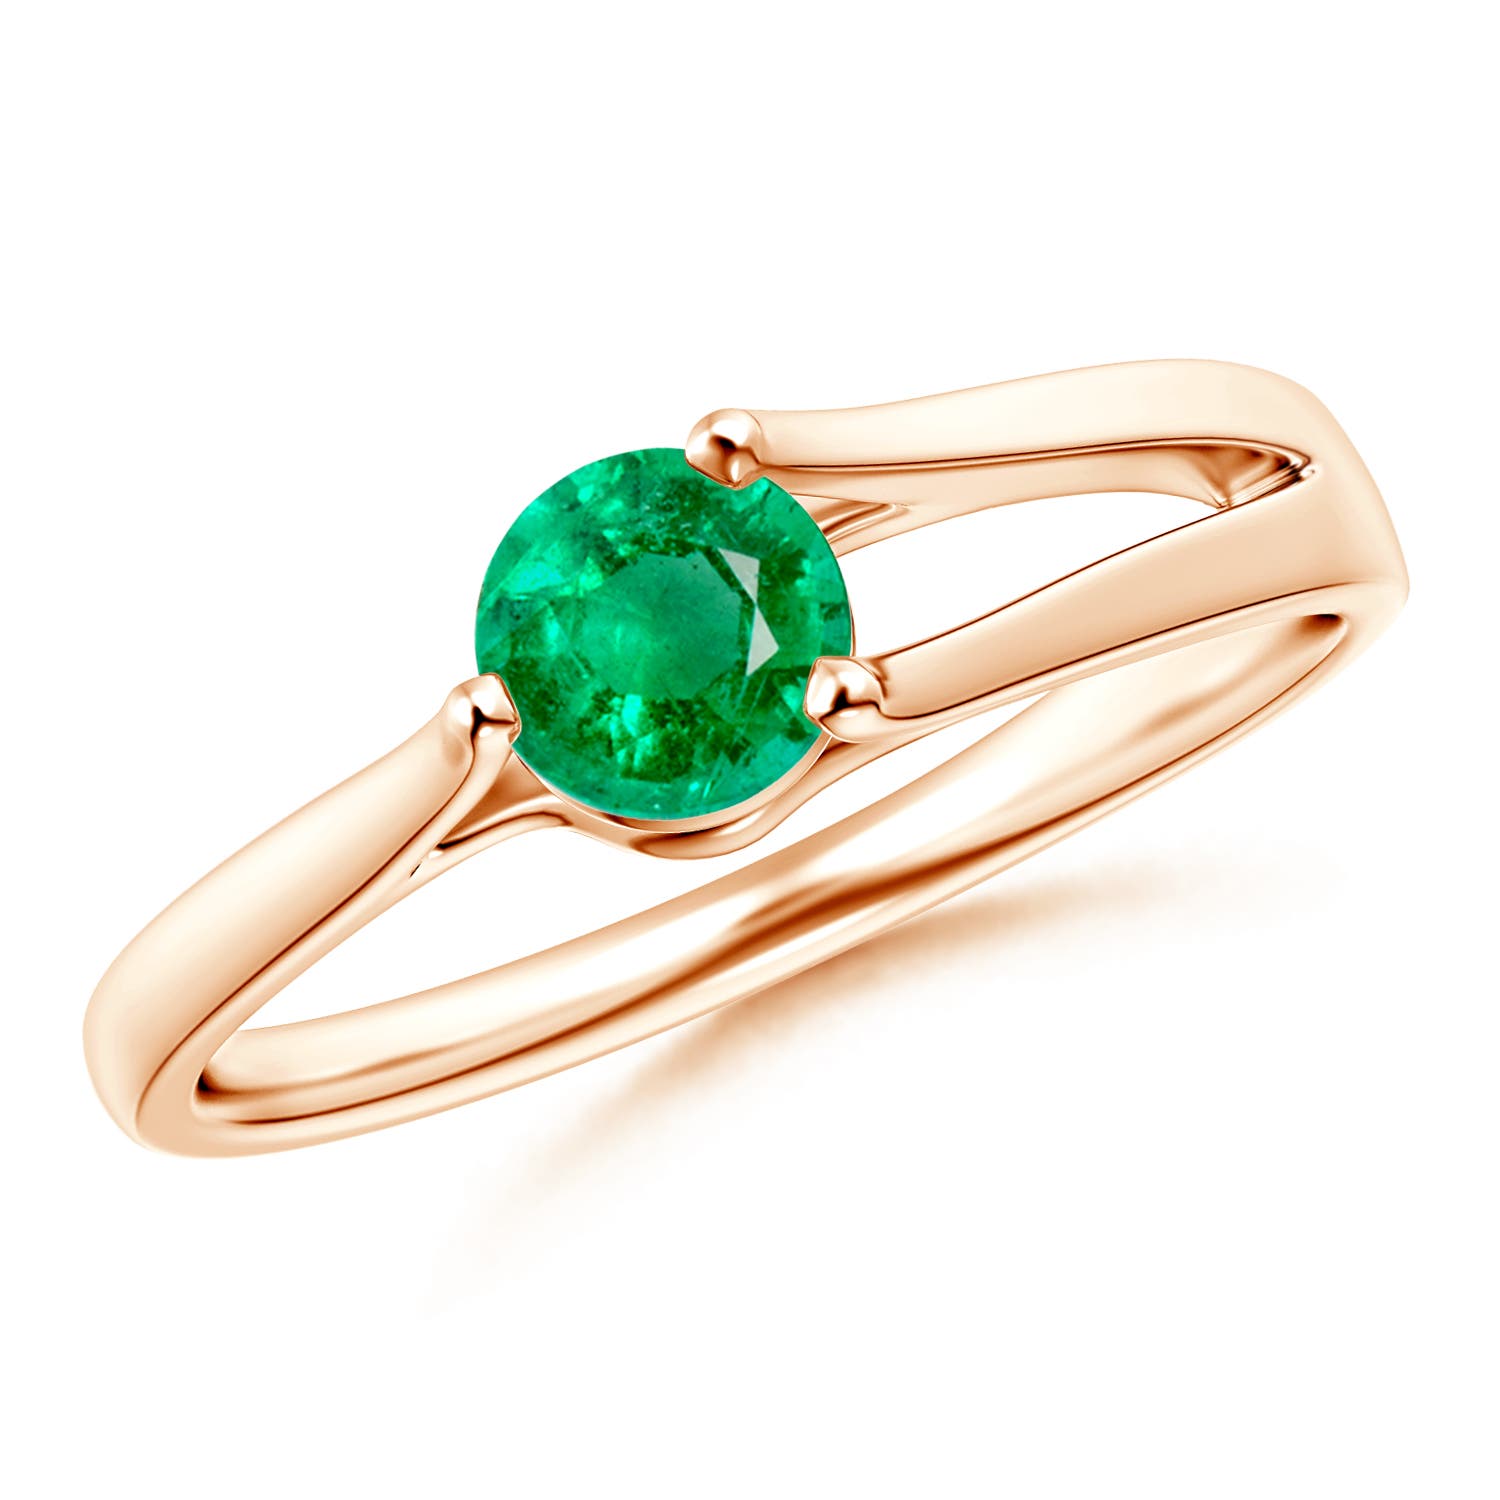 AAA - Emerald / 0.45 CT / 14 KT Rose Gold